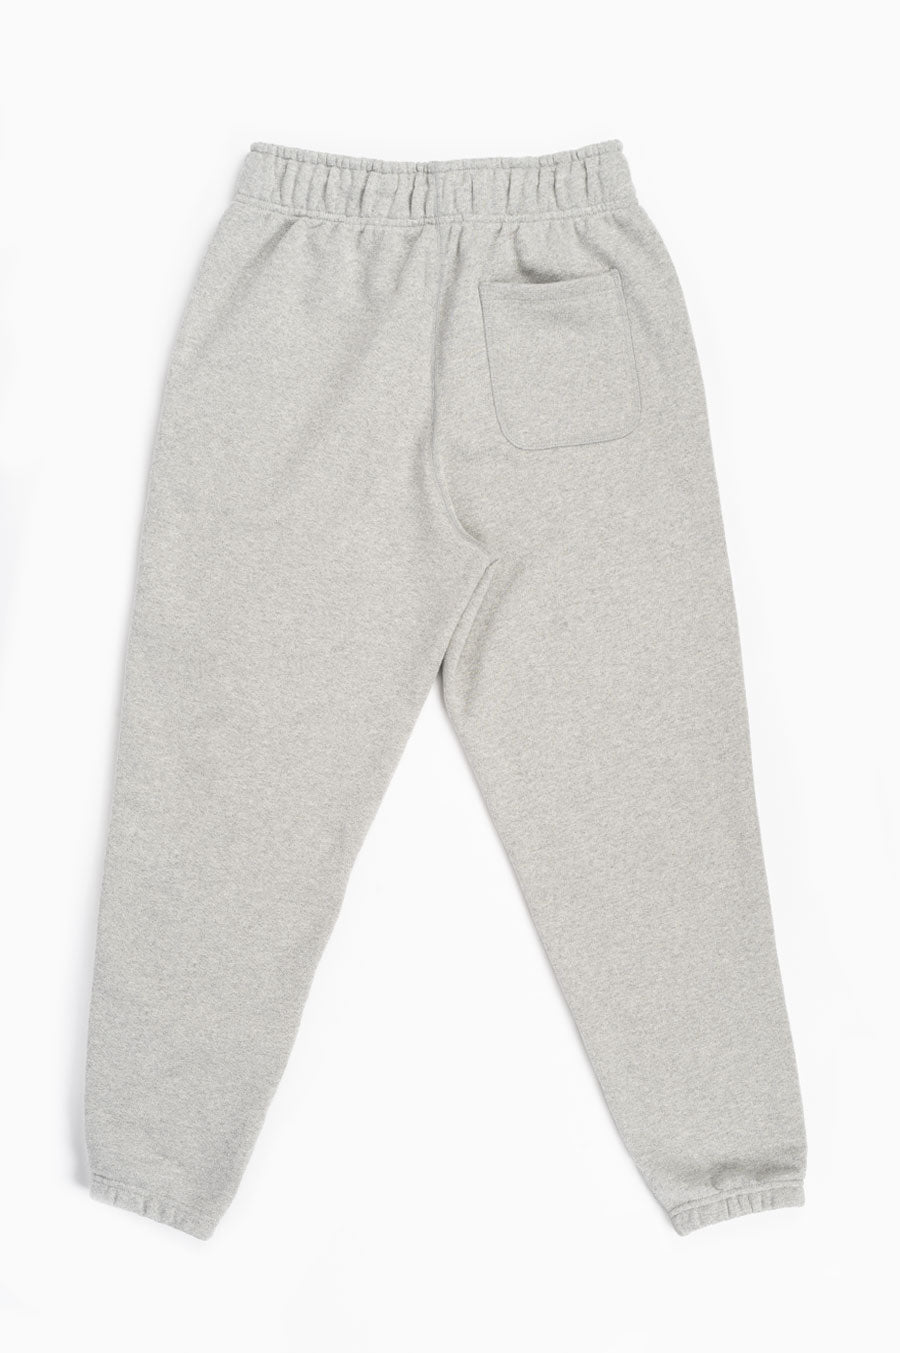 SWEATPANT MADE GREY BLENDS – BALANCE USA ATHLETIC IN NEW